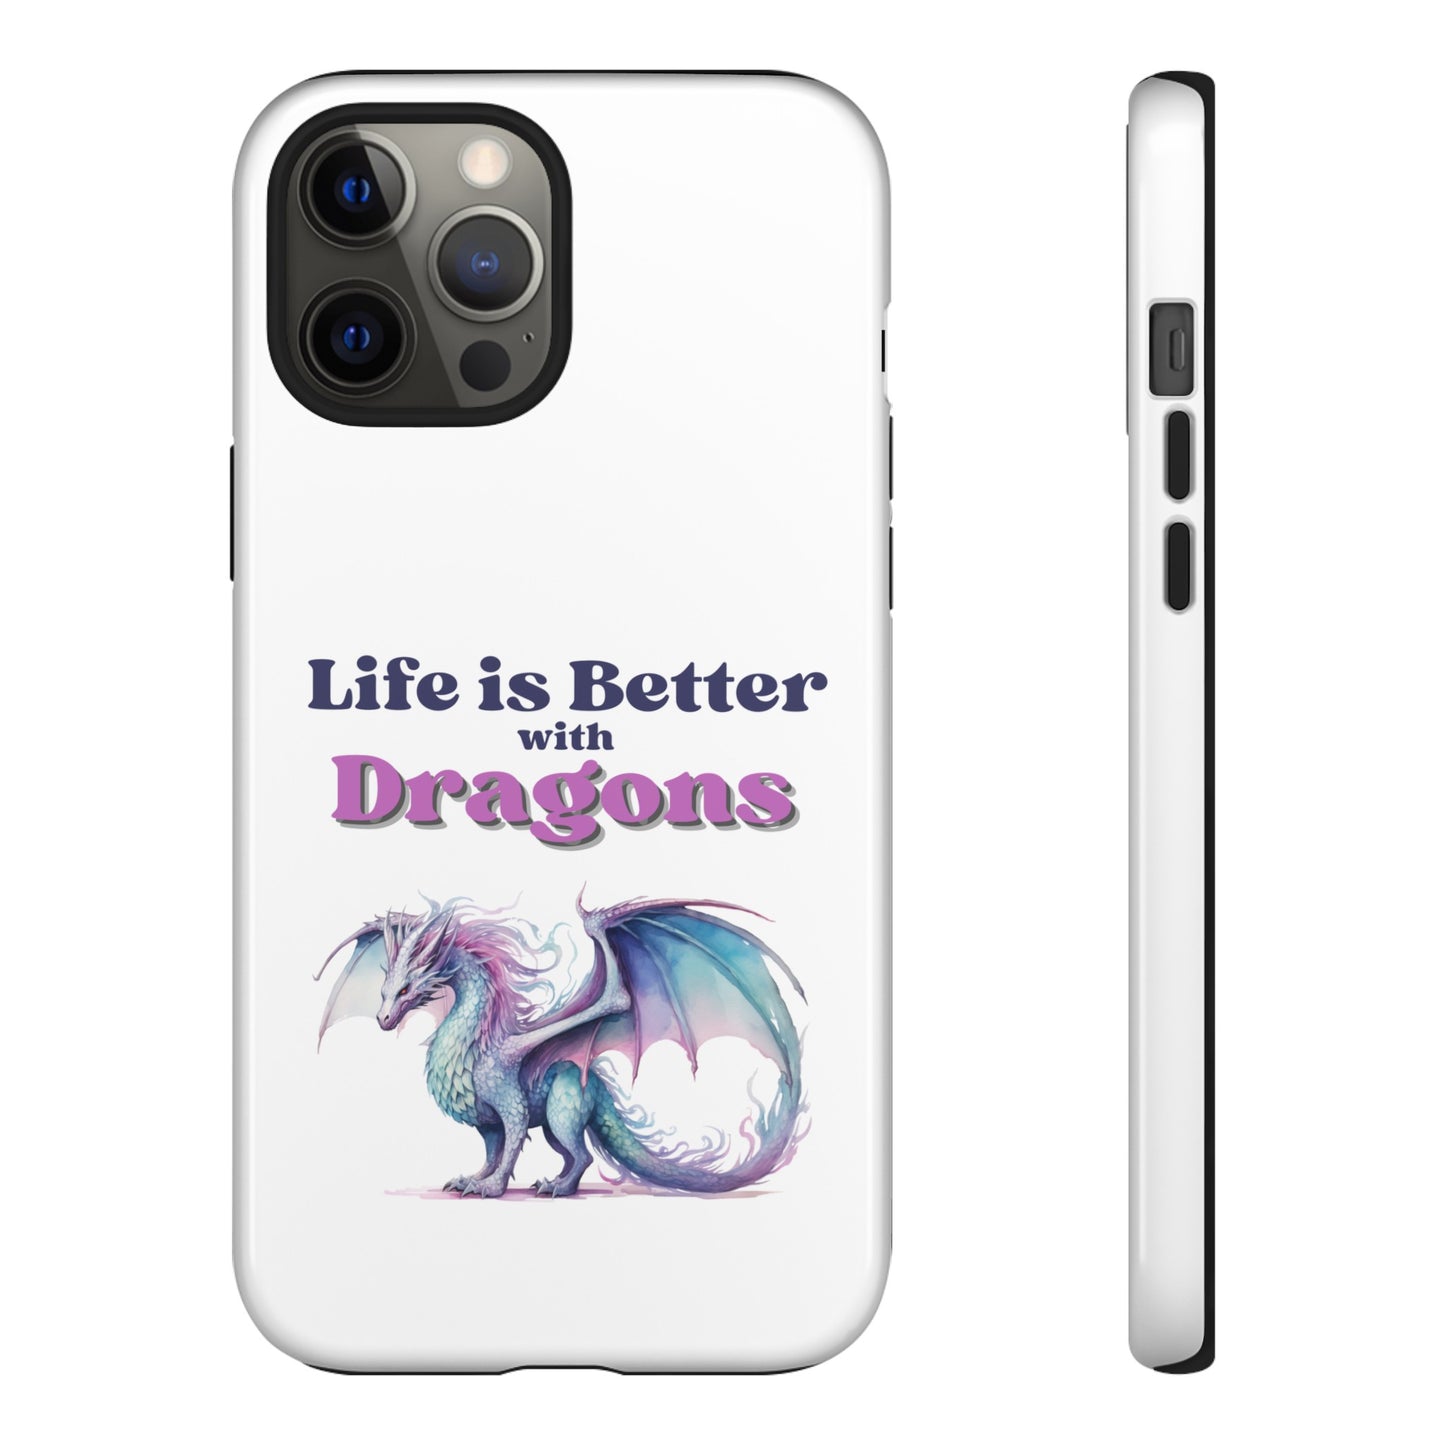 Life is Better with Dragons, Tough Cases